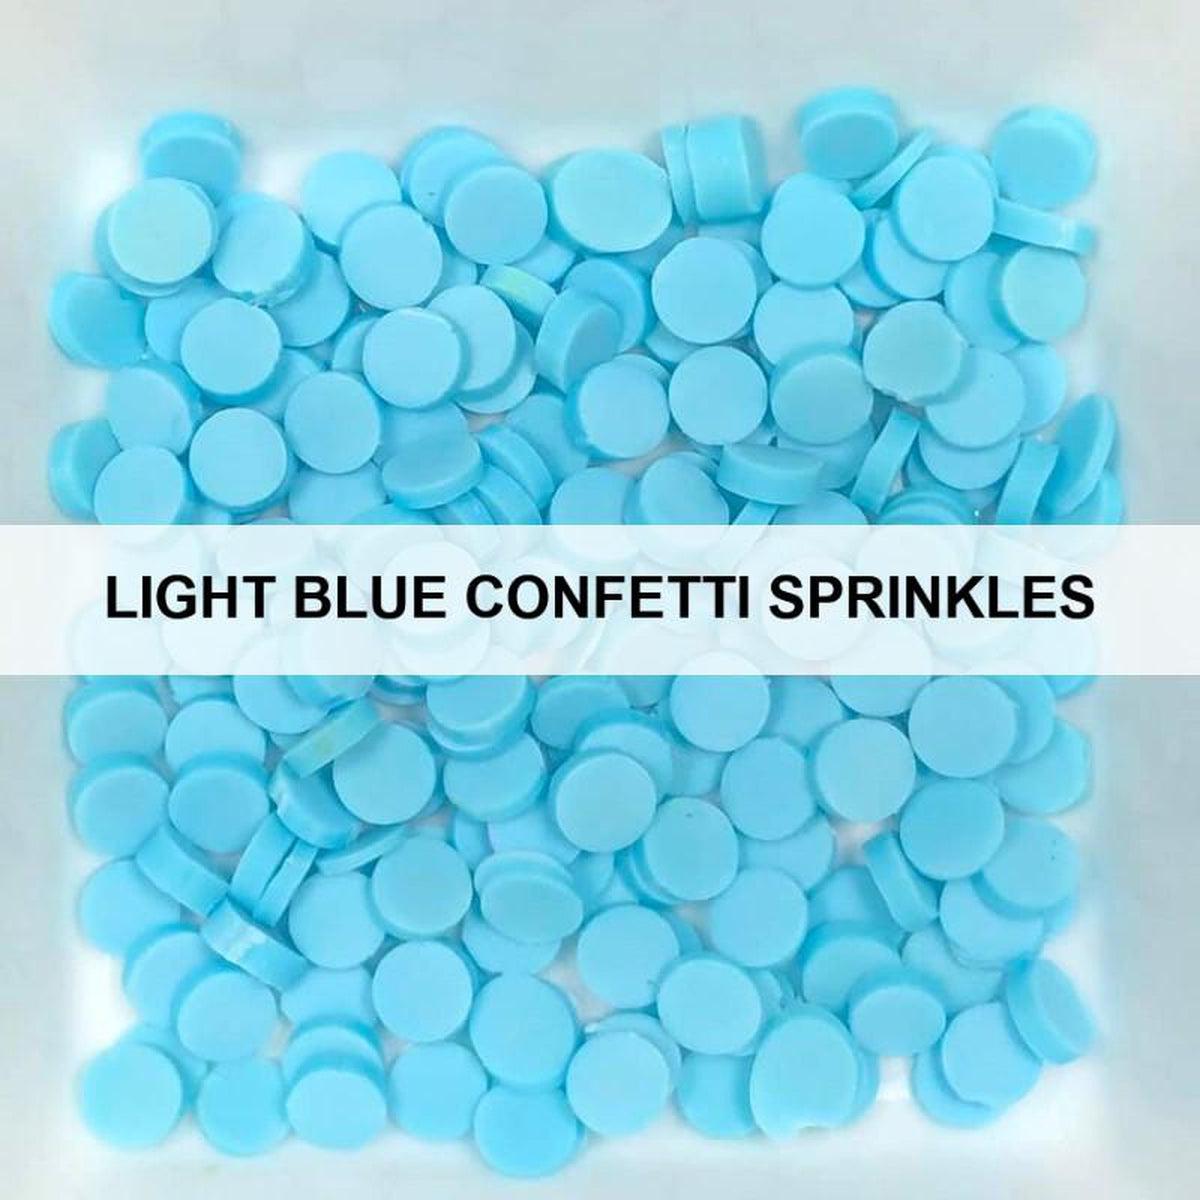 Light Blue Confetti Sprinkles by Kat Scrappiness - Kat Scrappiness